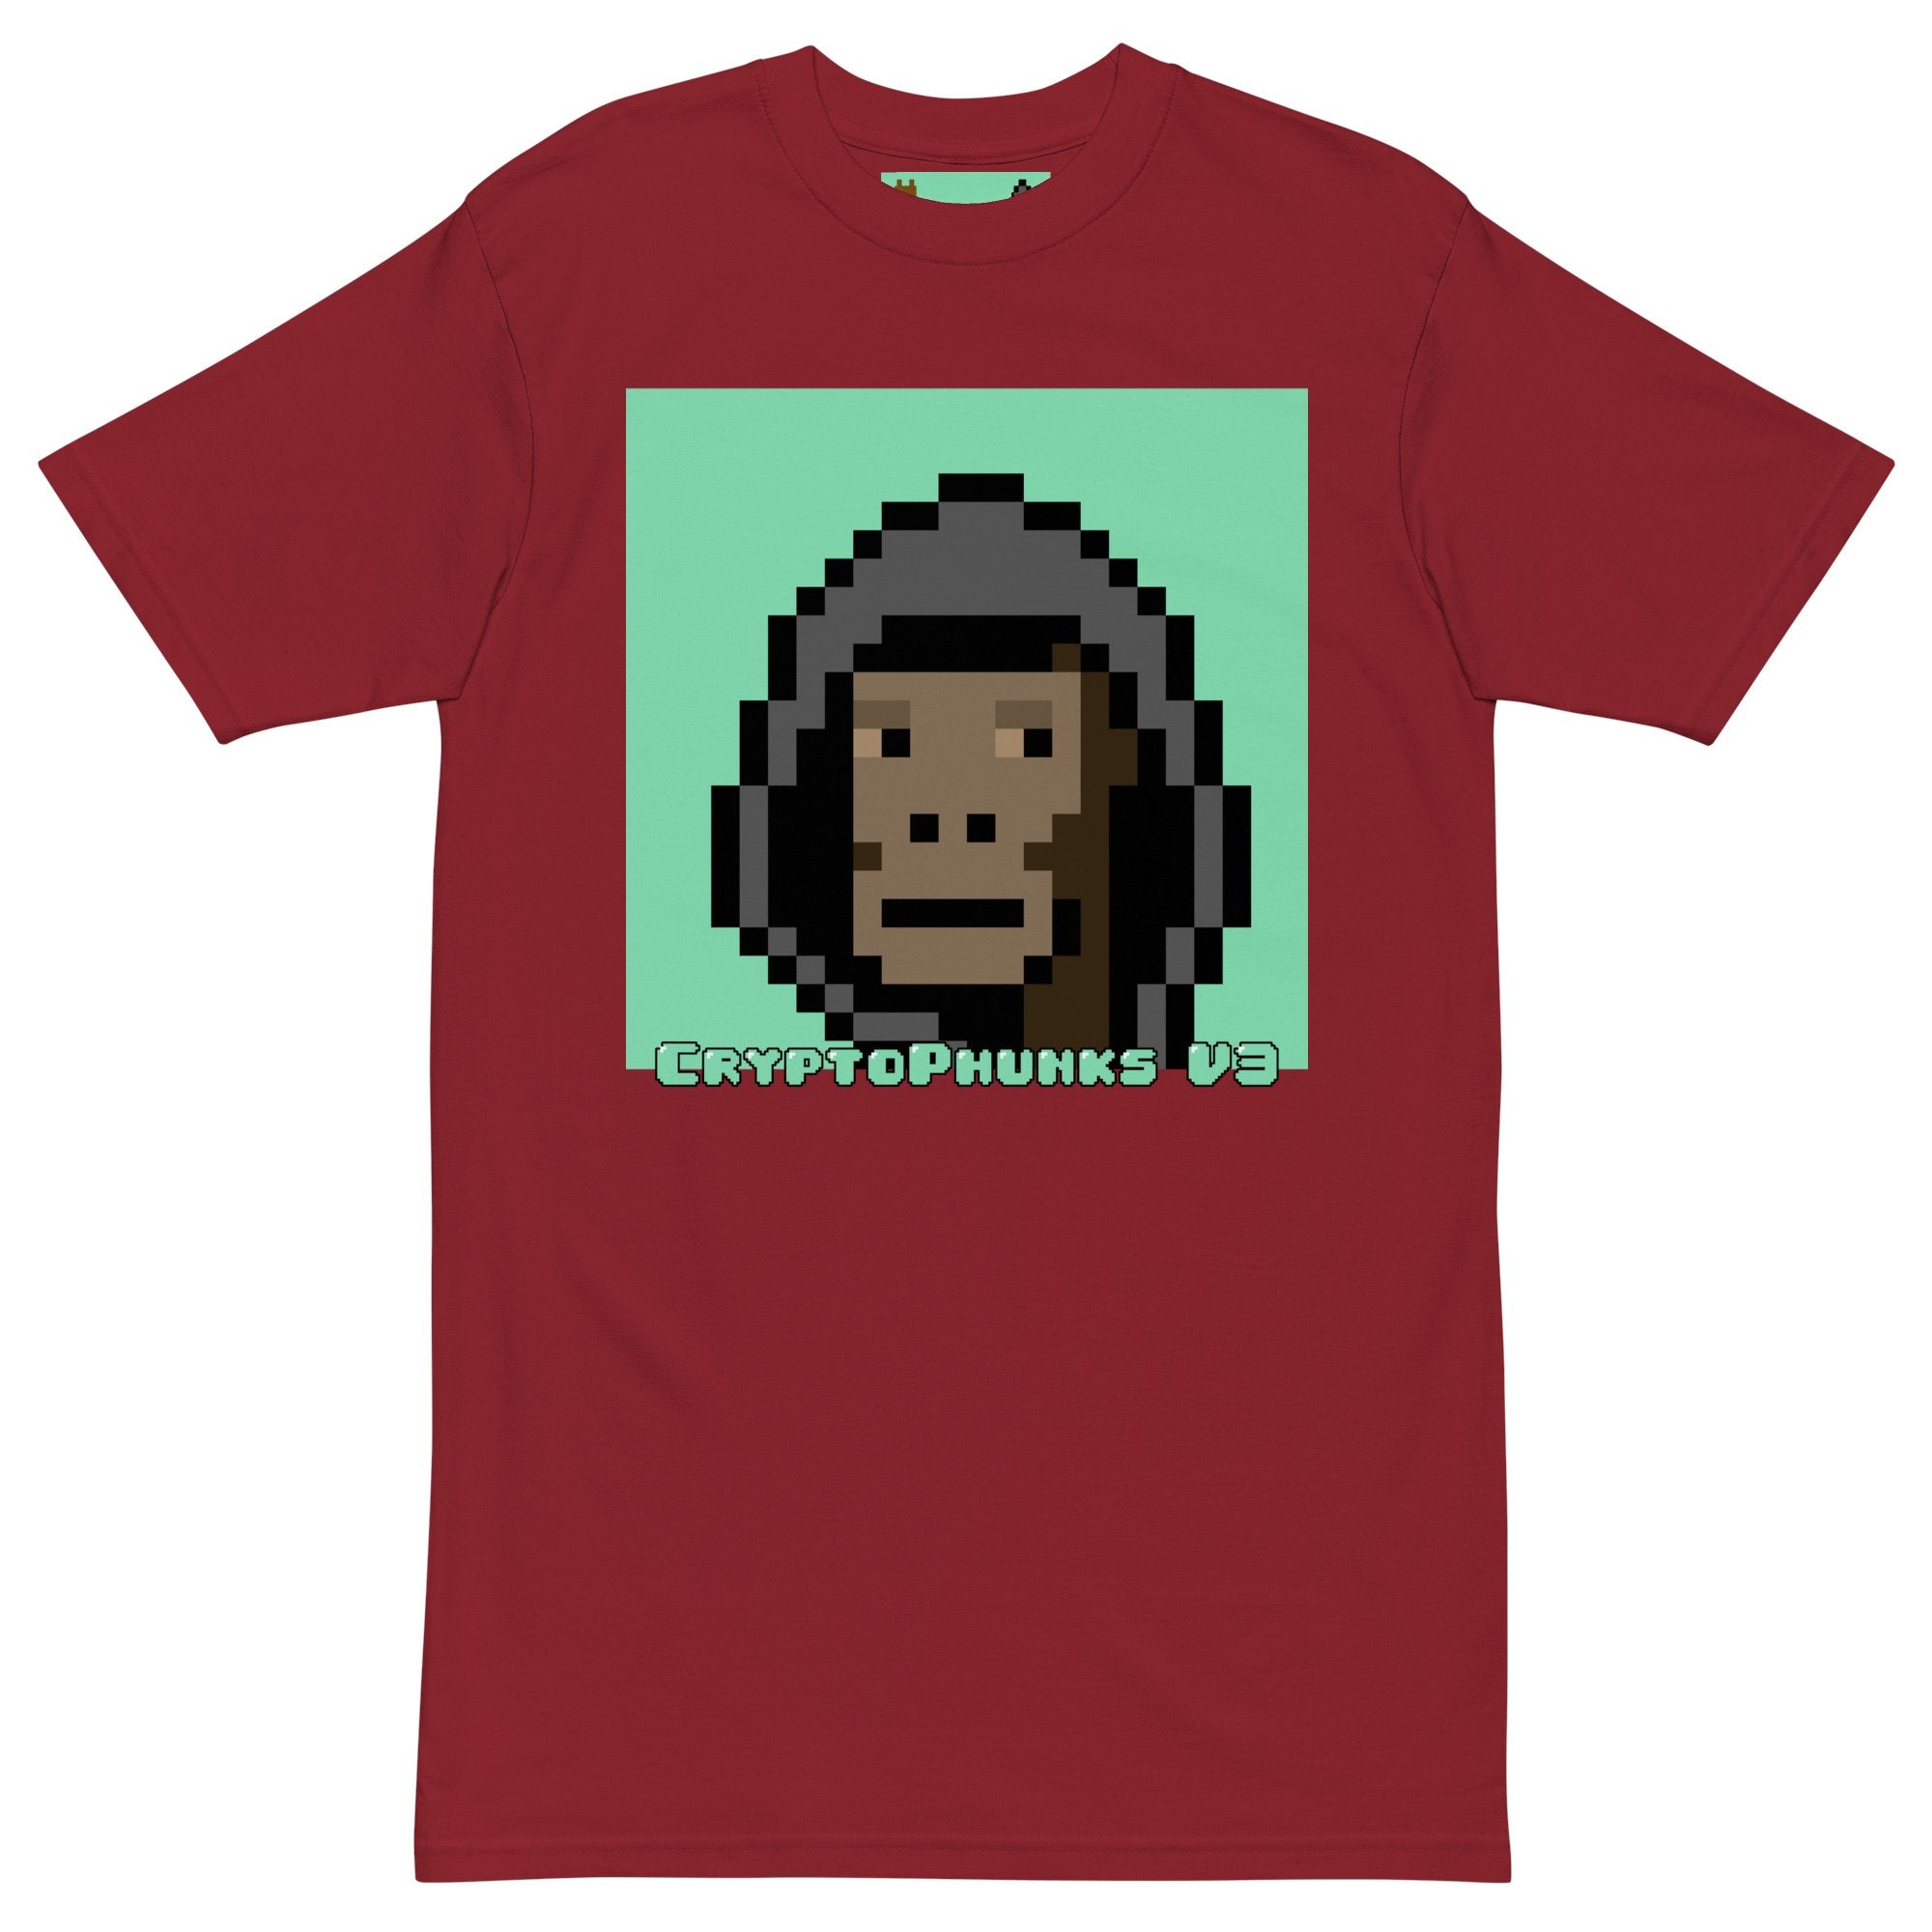 CryptoPhunks V3 T-shirt - Phunk #2924 on The Good Shop Online Store